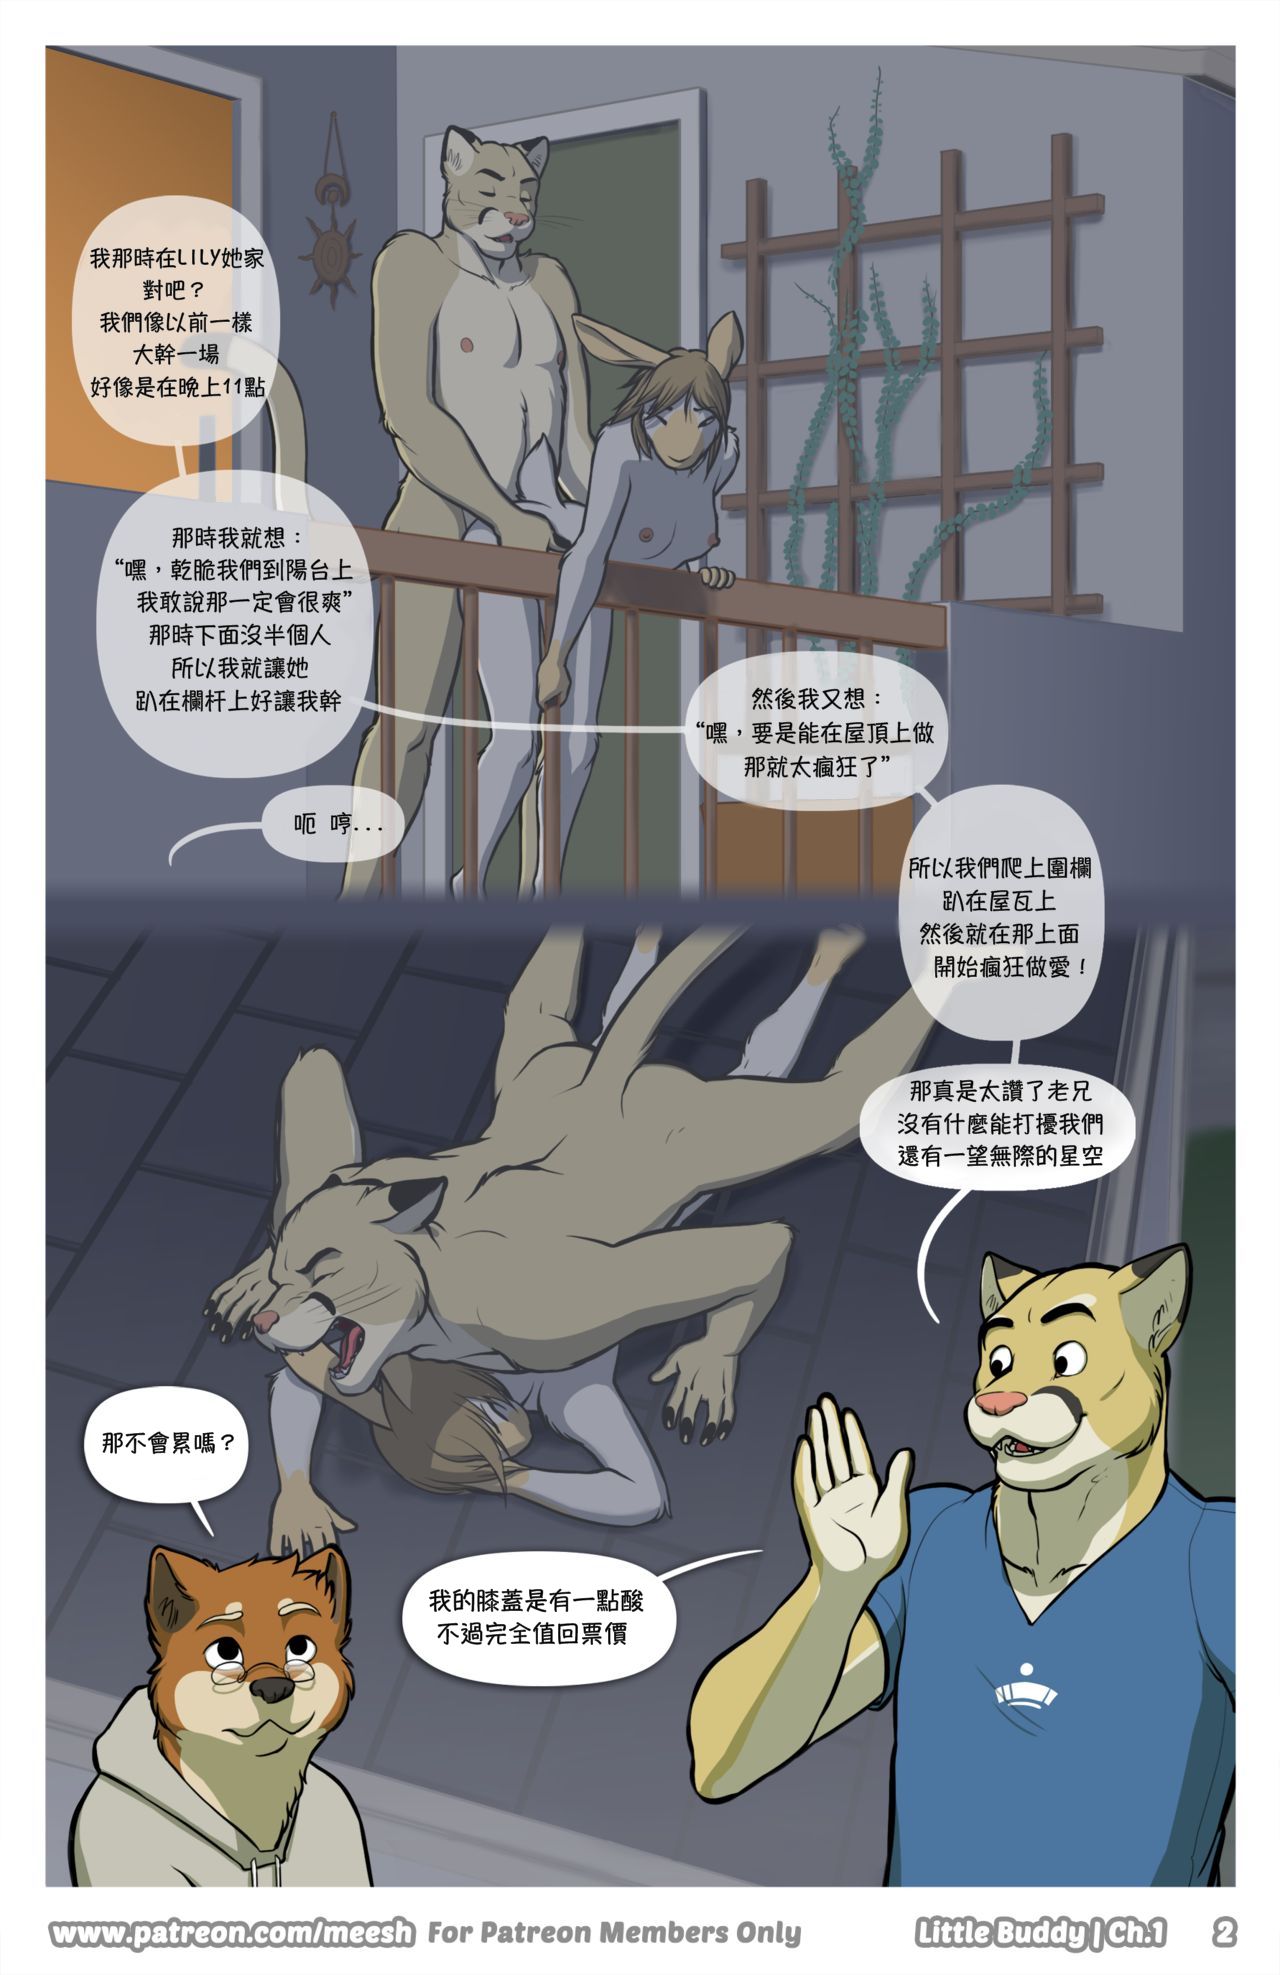 [Meesh] Little Buddy (High-Resolution) [Chapter 1: Complete] [Chinese] [簡yee個人] 